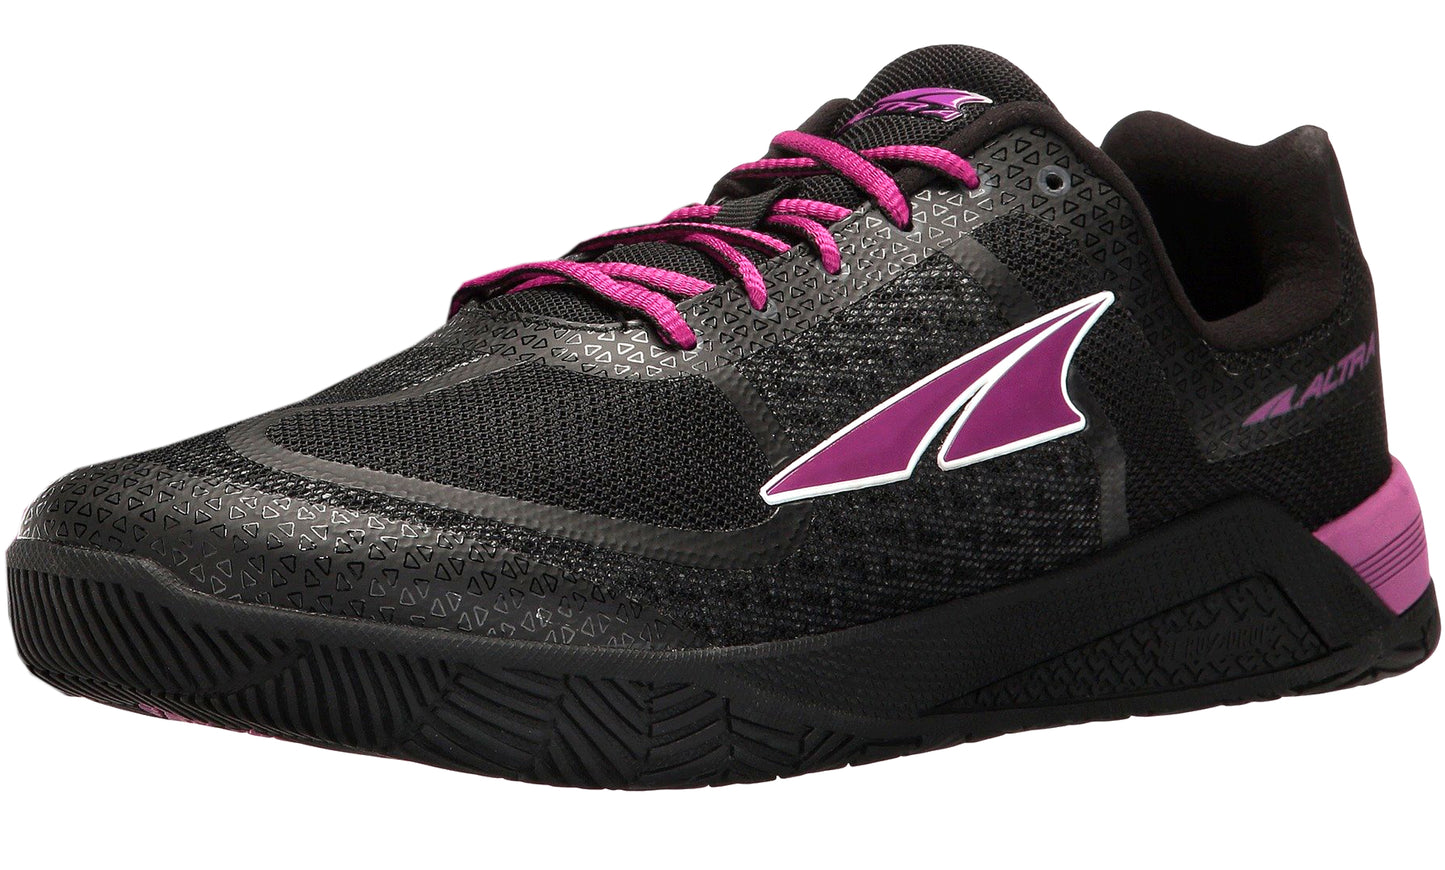 Lateral of Black/Purple Altra Womens Cross-Training Gym PowerSole Crossfit Workout Shoes Hiit Xt